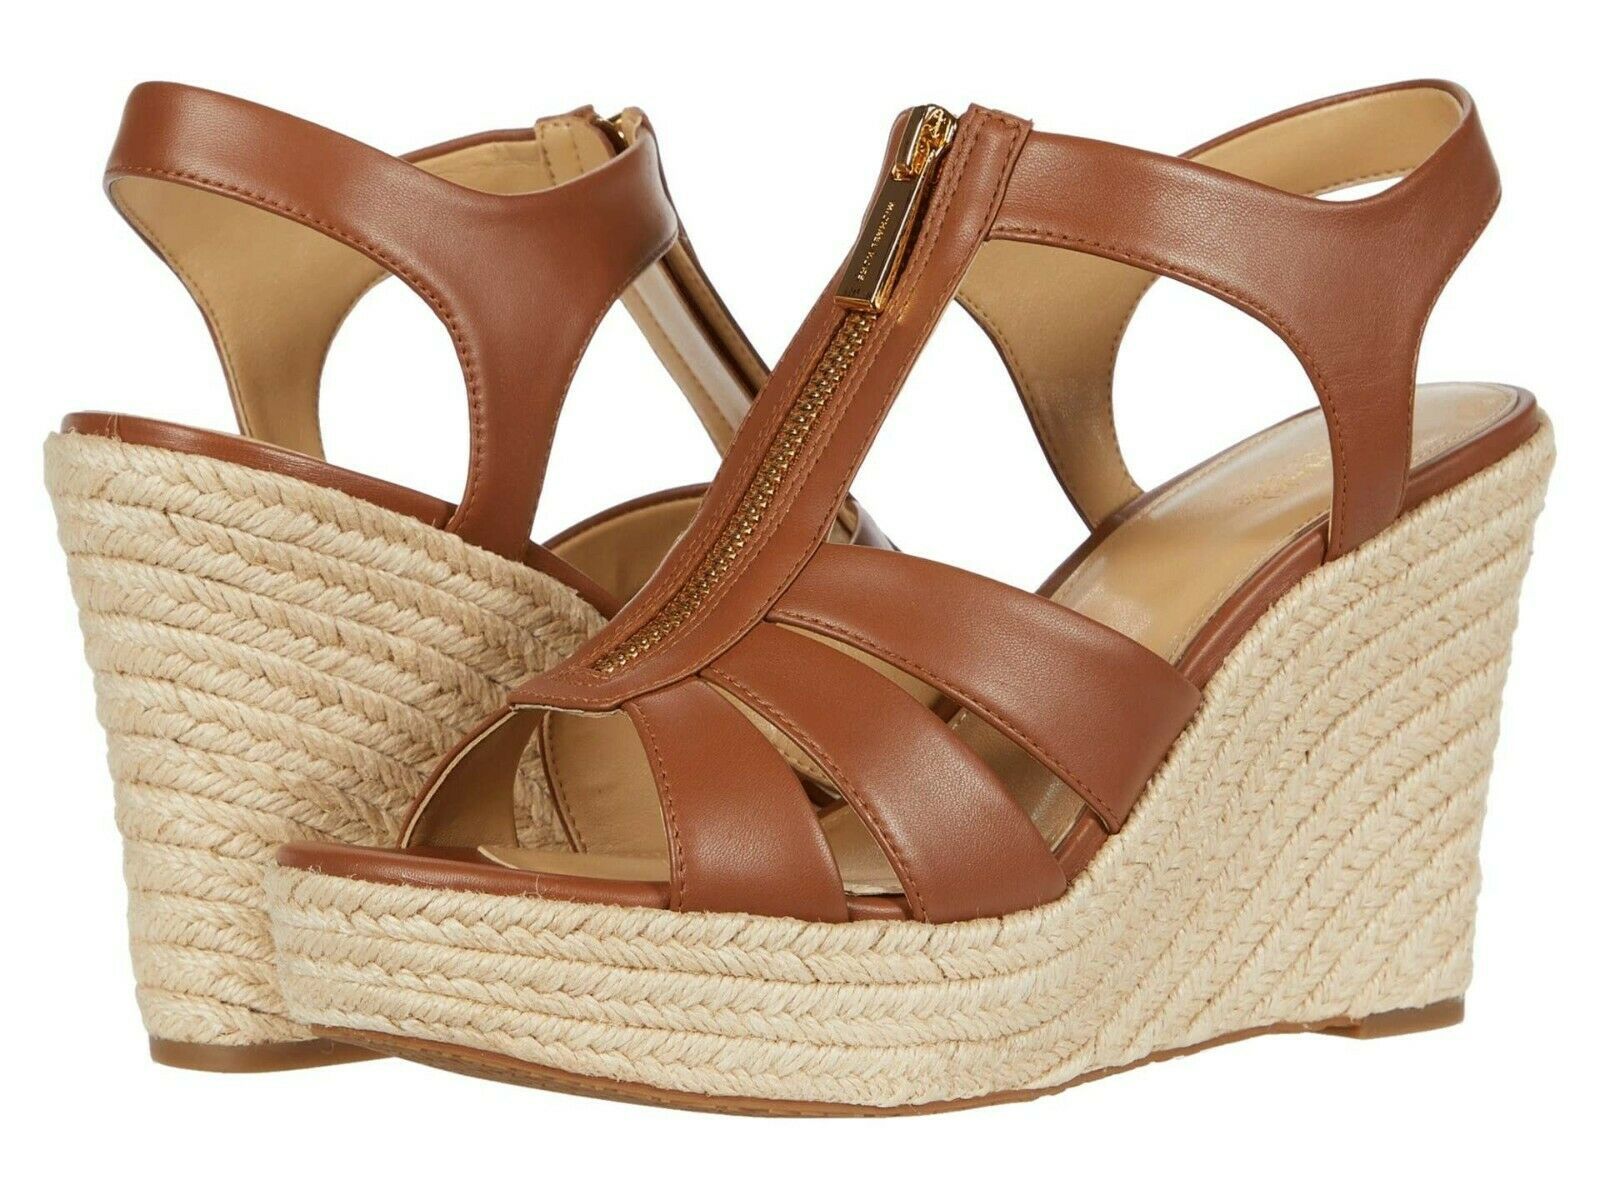 Primary image for MICHAEL Michael Kors Berkley Leather Espadrille Wedges, Luggage Multiple Sizes